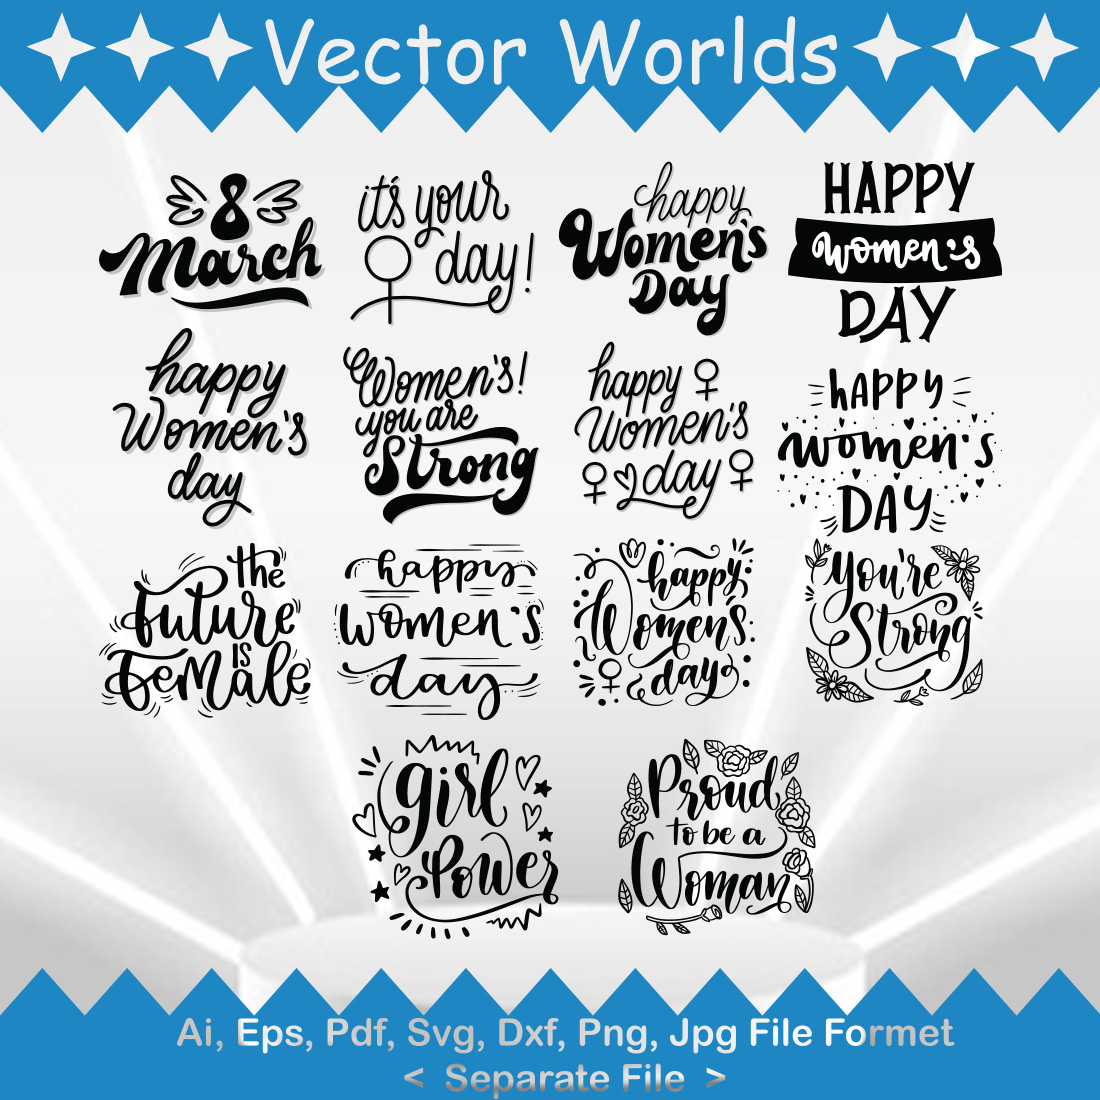 Happy women's Day SVG Vector Design cover image.